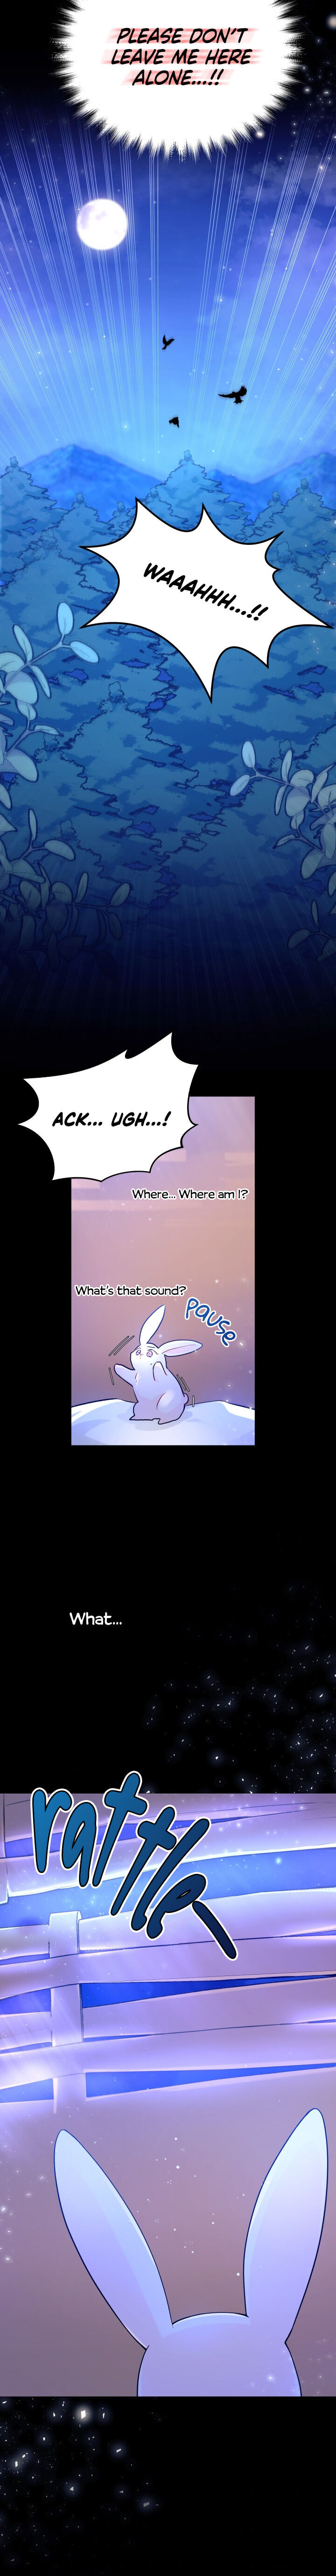 The Symbiotic Relationship Between A Rabbit and A Black Panther - Chapter 1 Page 10